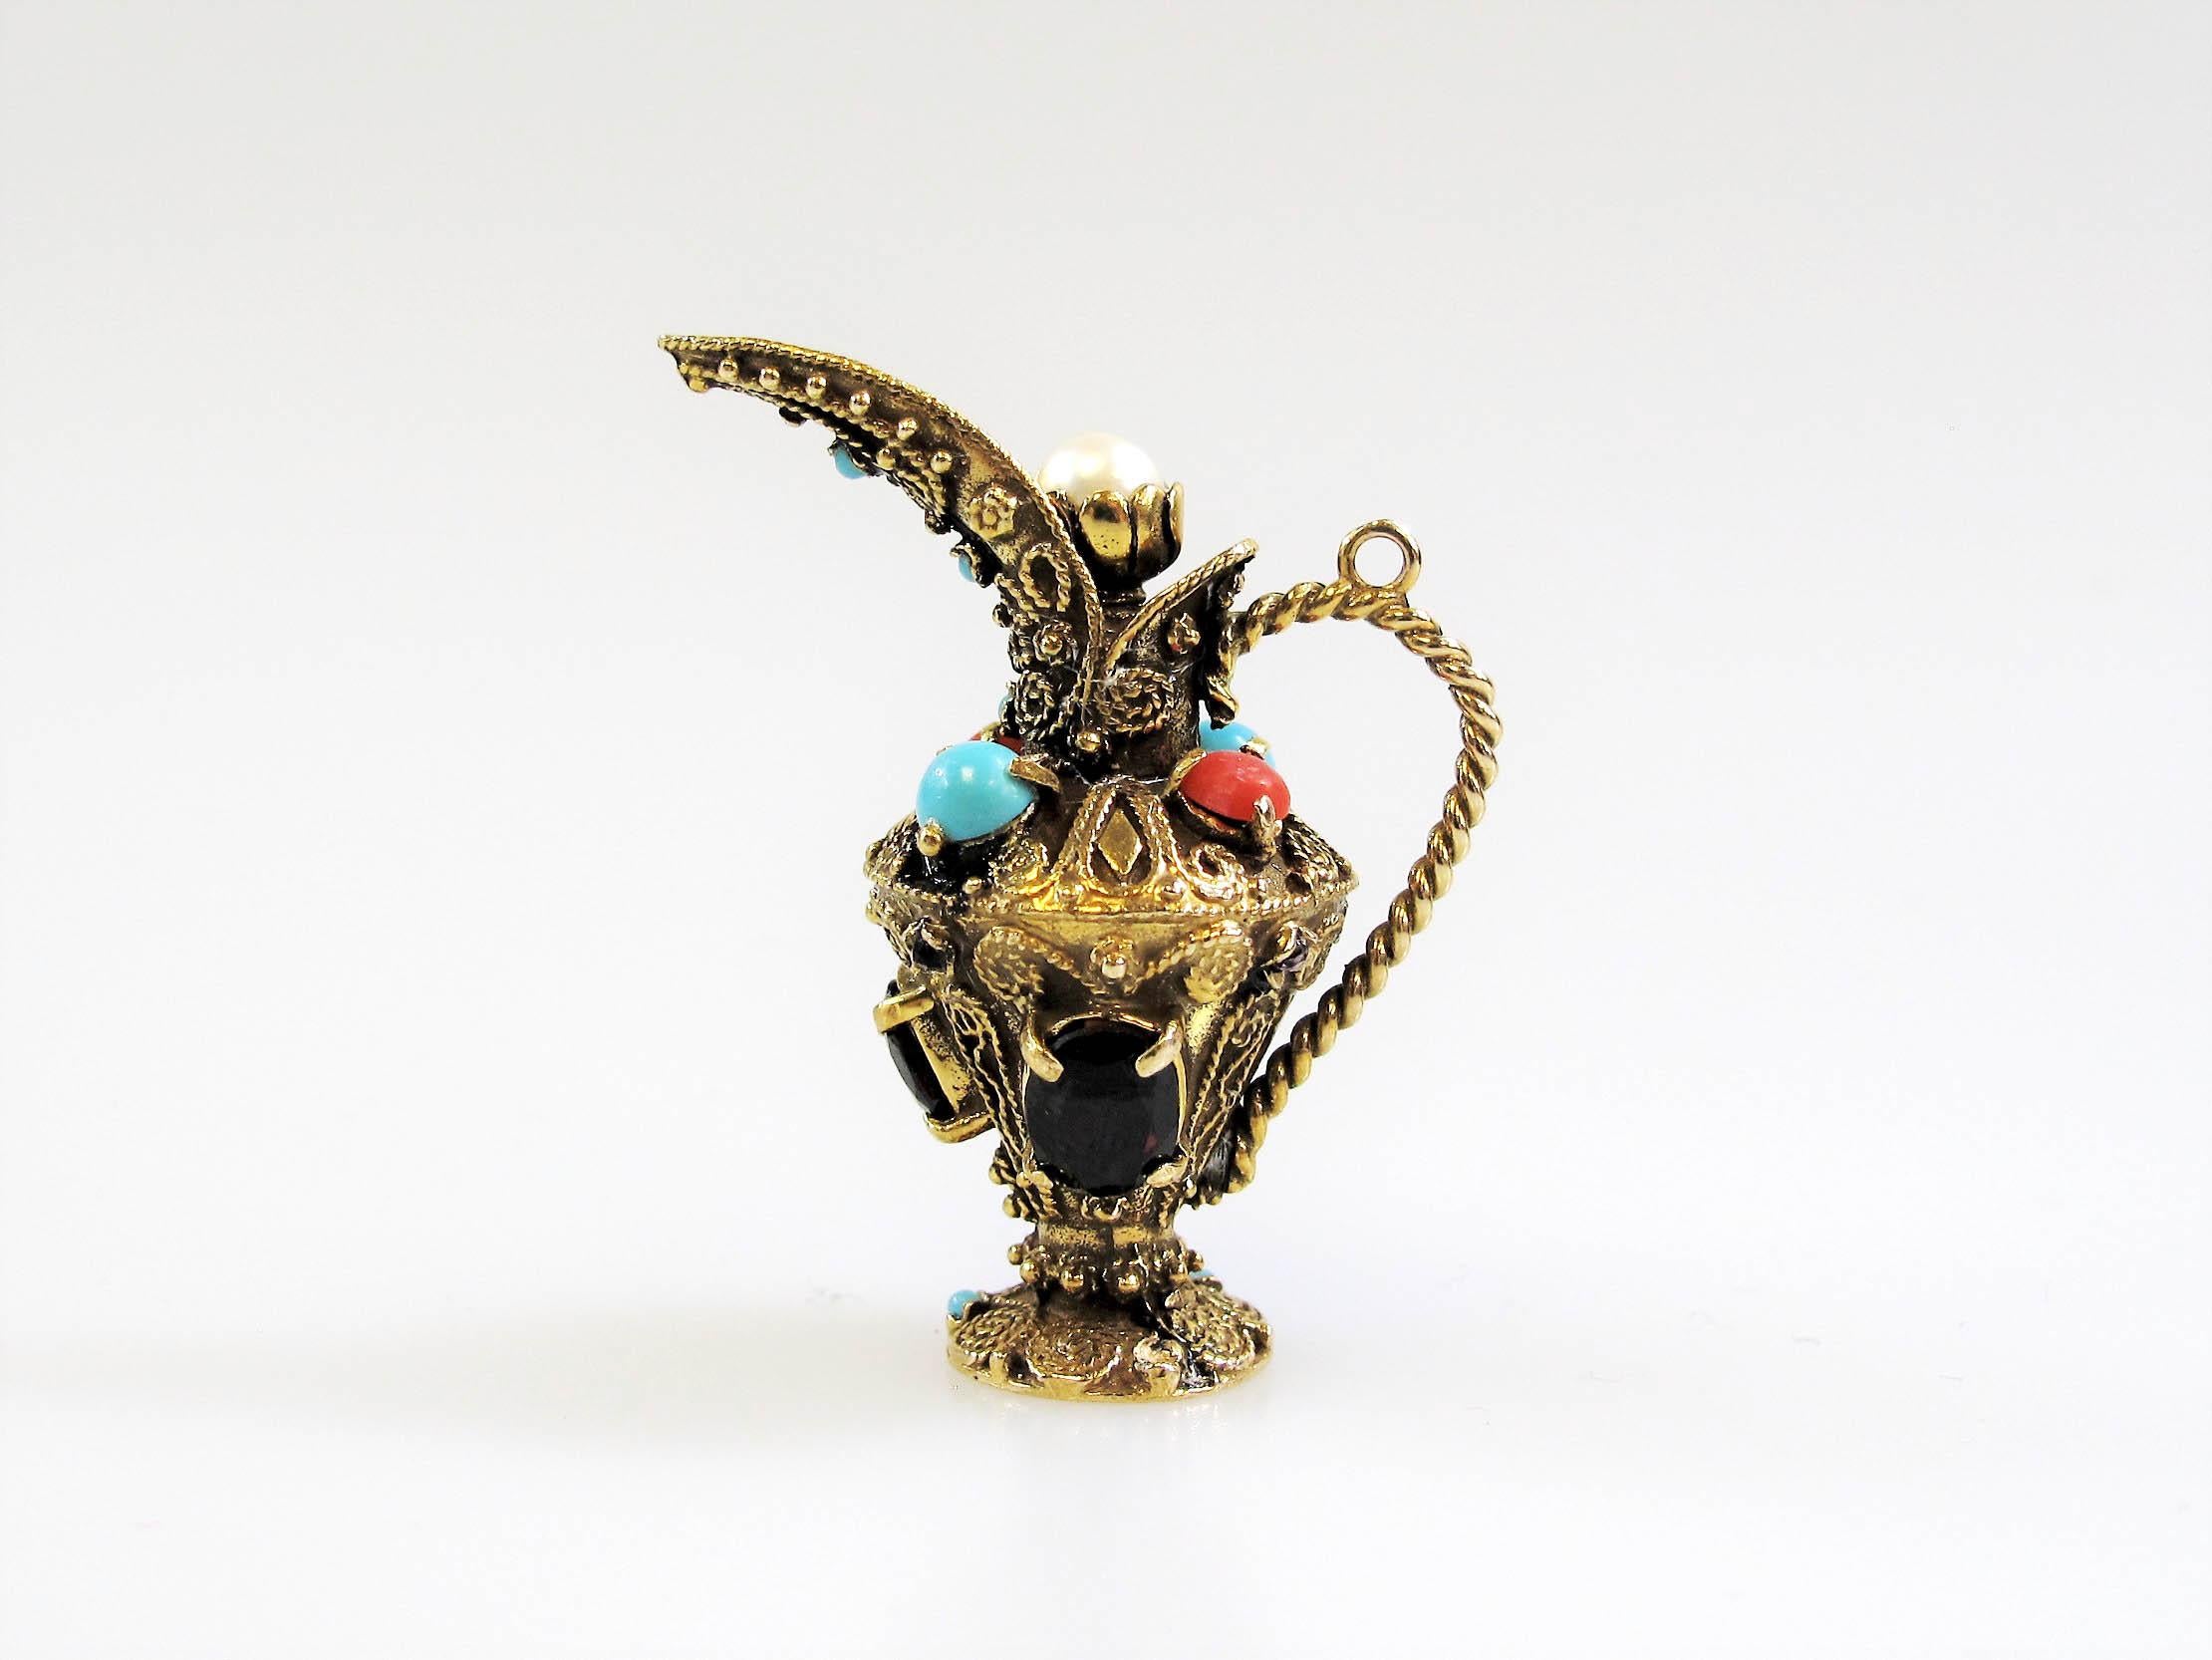 Unique multi-gemstone pitcher charm/pendant with incredible fine details. This colorful piece features an intricately carved 14 karat yellow gold pitcher with an elongated spout, twisted handle and a screw-off top. The pendant with is also filled